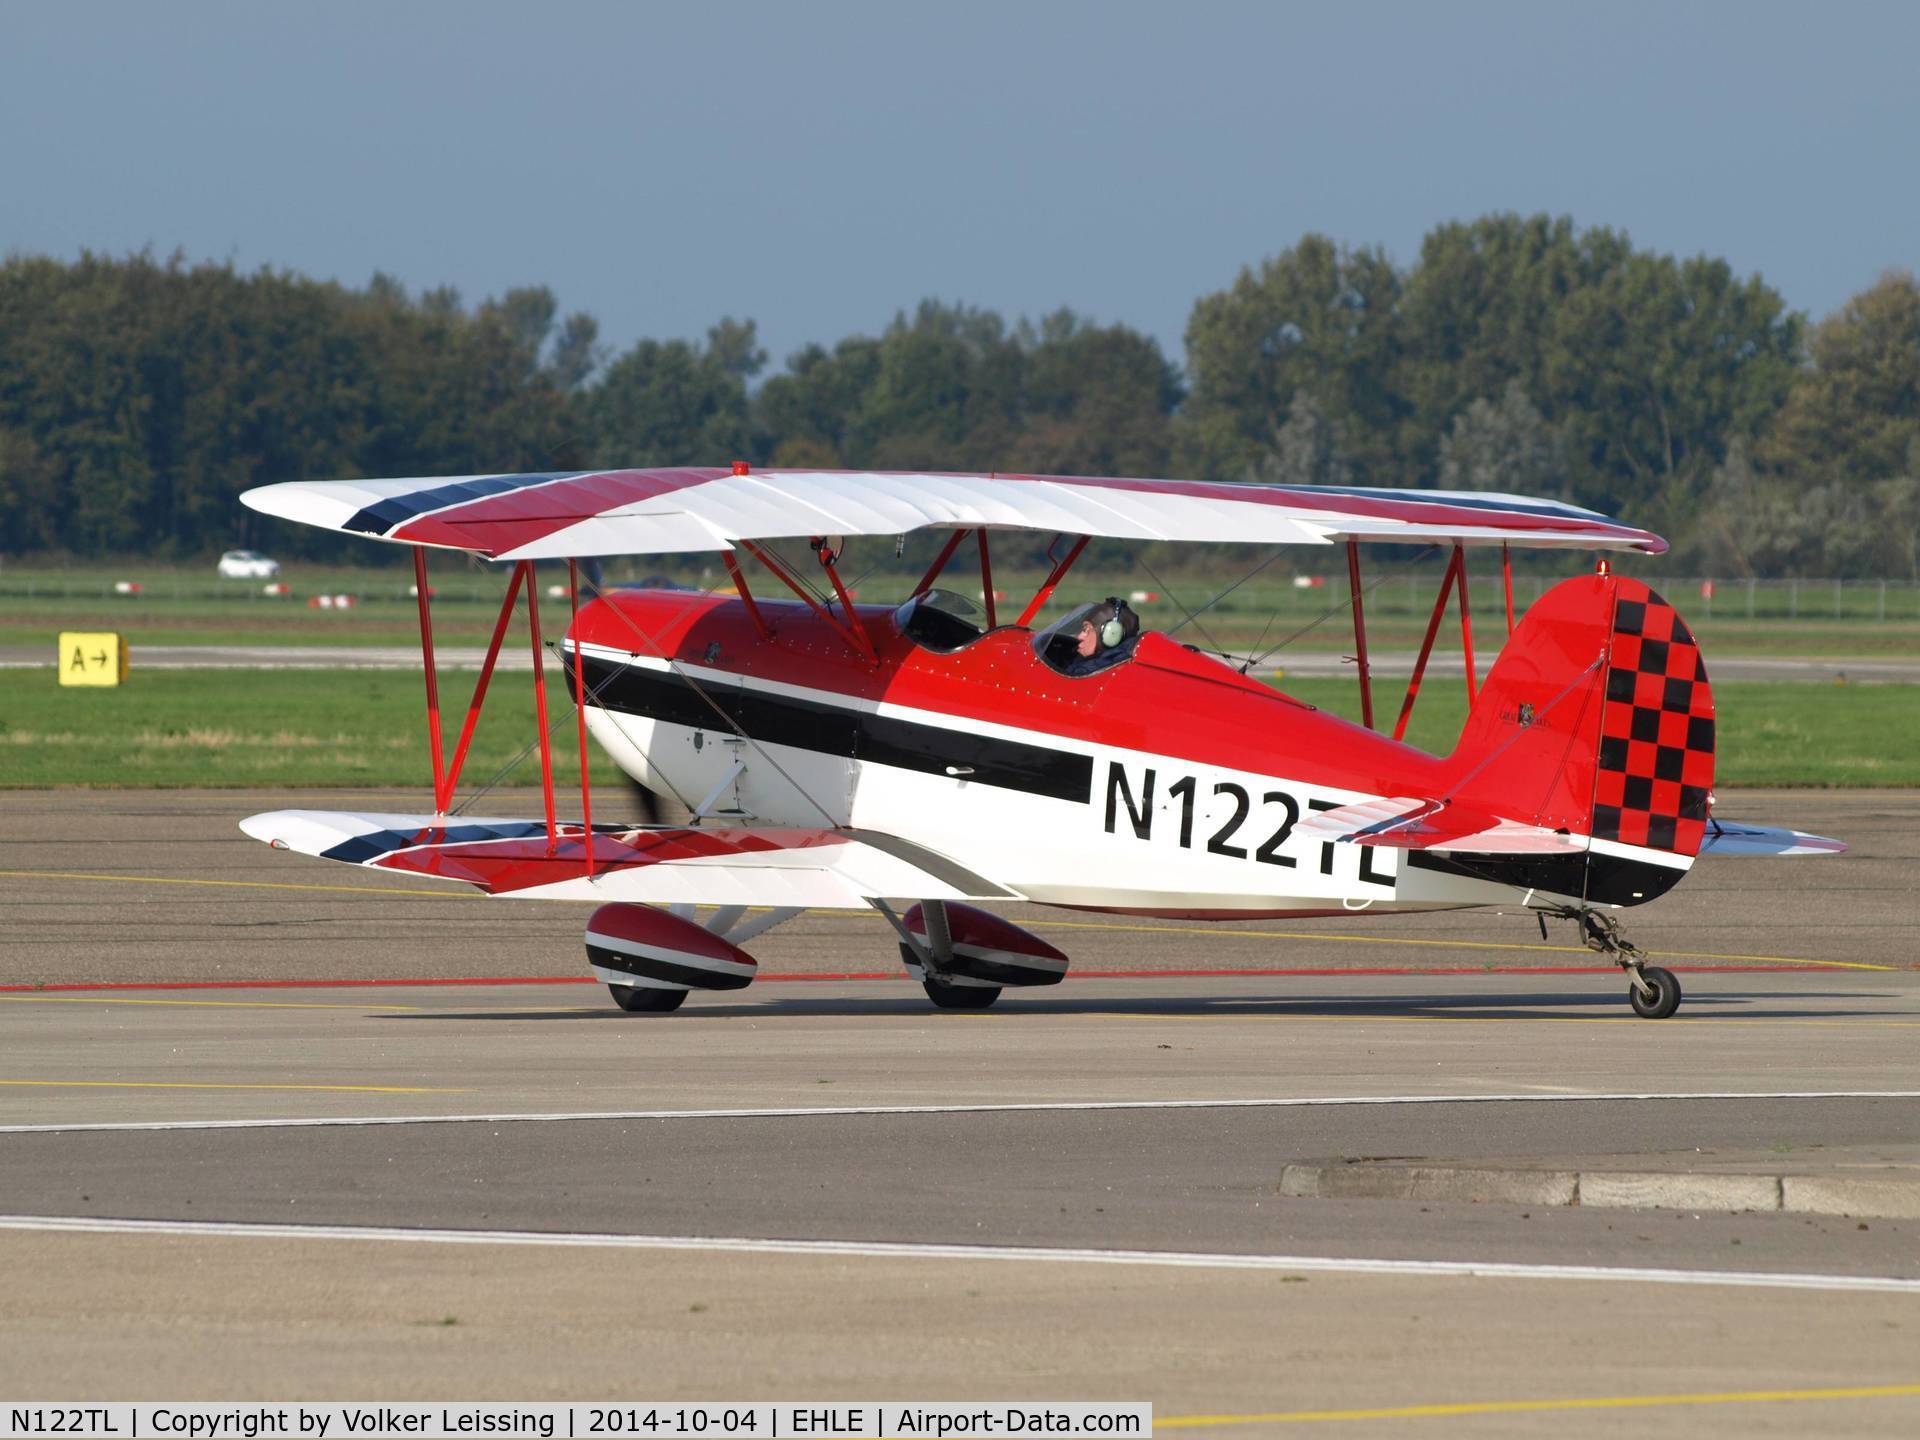 N122TL, 1976 Great Lakes 2T-1A-2 Sport Trainer C/N 0735, just arrived